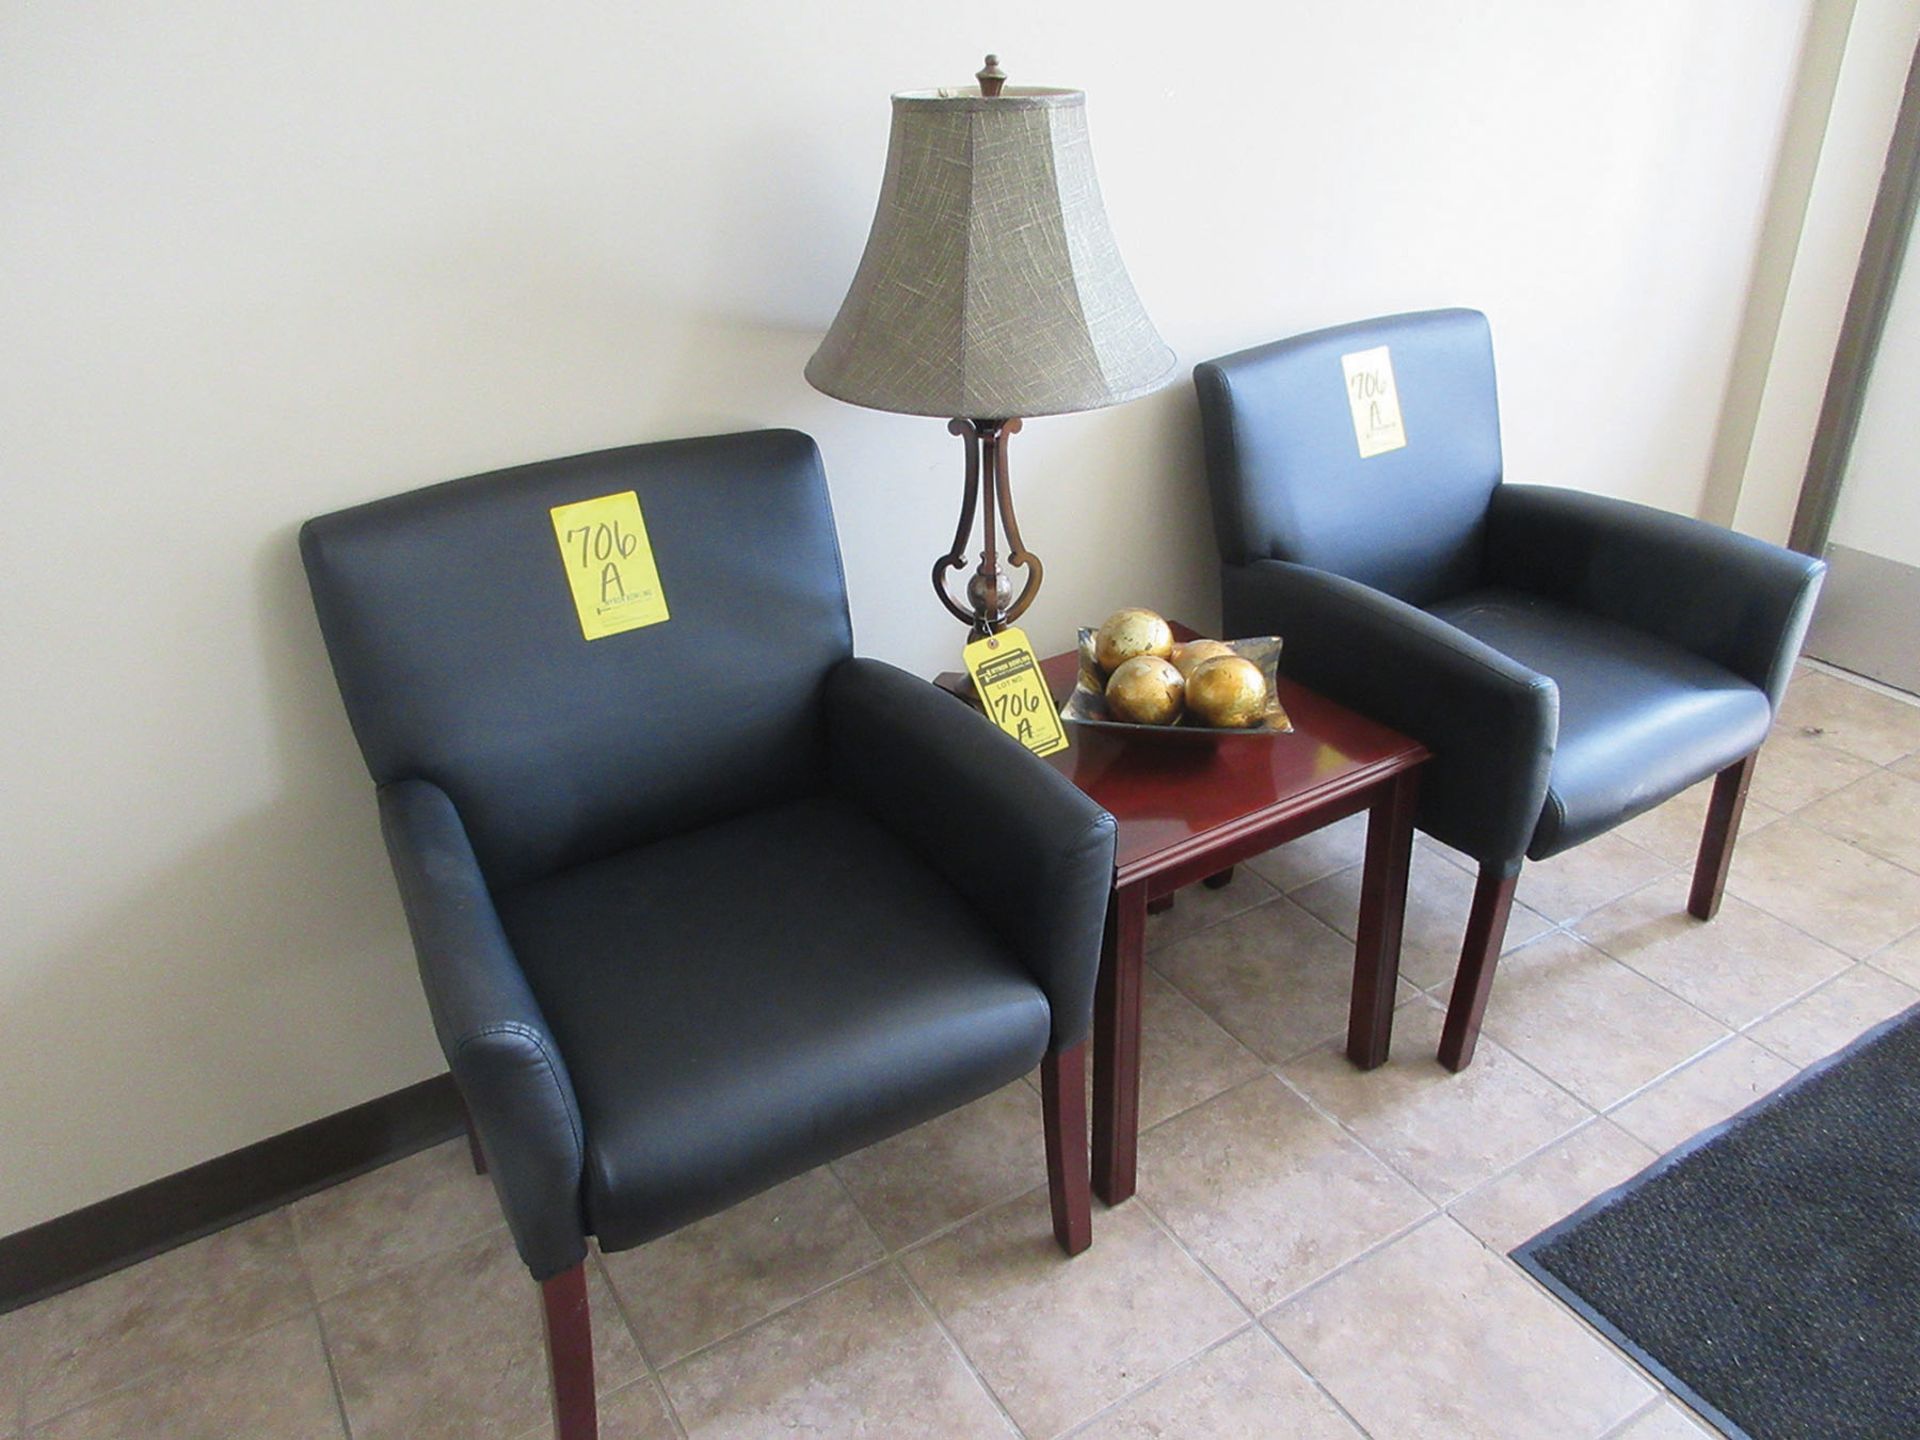 RECEPTION AREA; (2) CHAIRS, SIDE TABLE, LAMP, AND PLANT